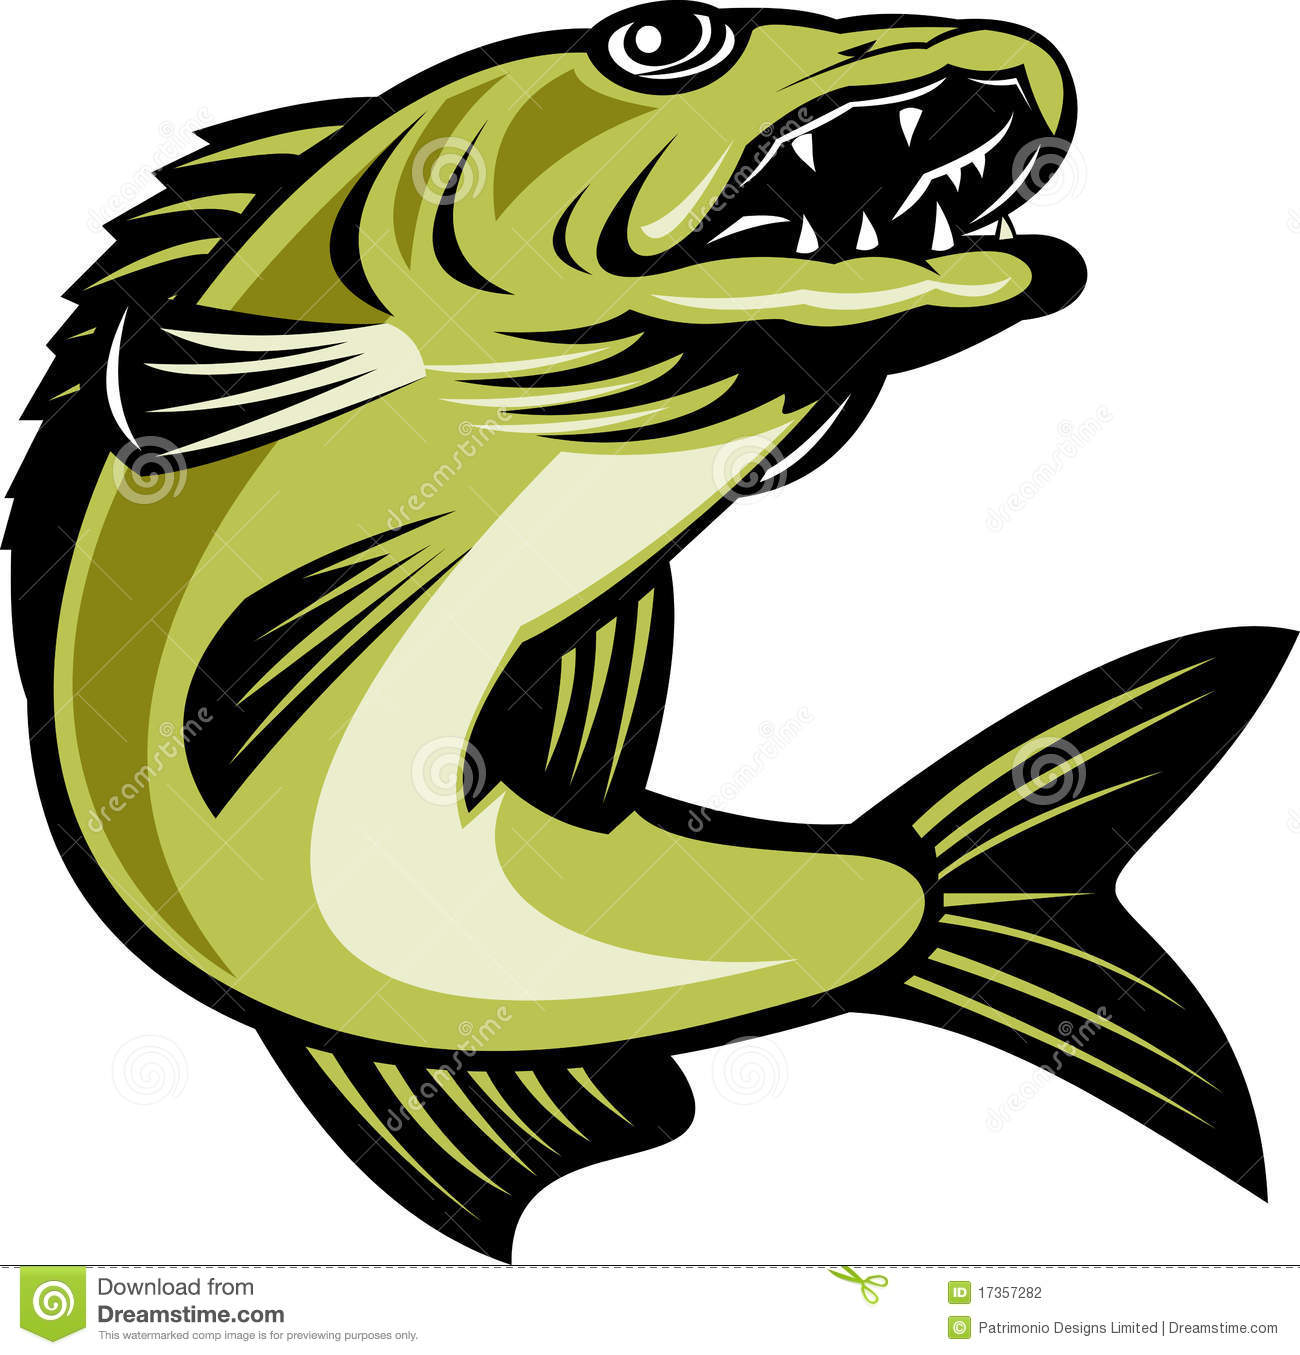 Retro Illustration Of A Walleye Fish Jumping Isolated On White